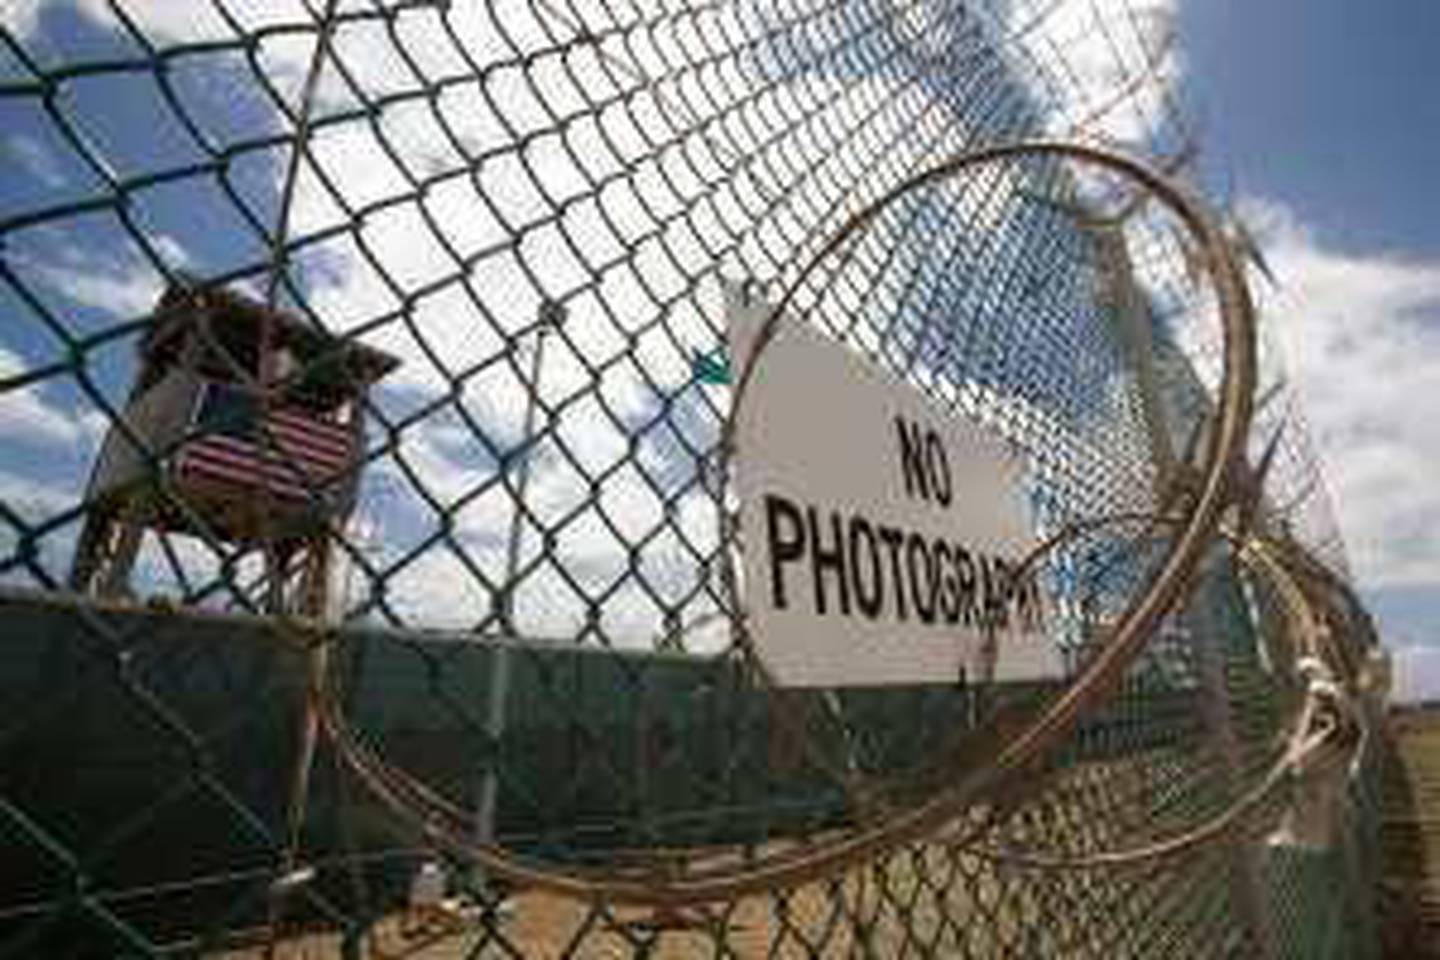 The outer fence and guard tower at Camps 1 & 4 at Camp Delta at the US Naval Station in Guantanamo Bay, Cuba, 24 April 2007 mans his security station. US Militrary officials list about 385 current detainees of various threat levels and nationalities being held on the US base in Cuba captured in the US war on terror. AFP Photo/Paul J. Richards